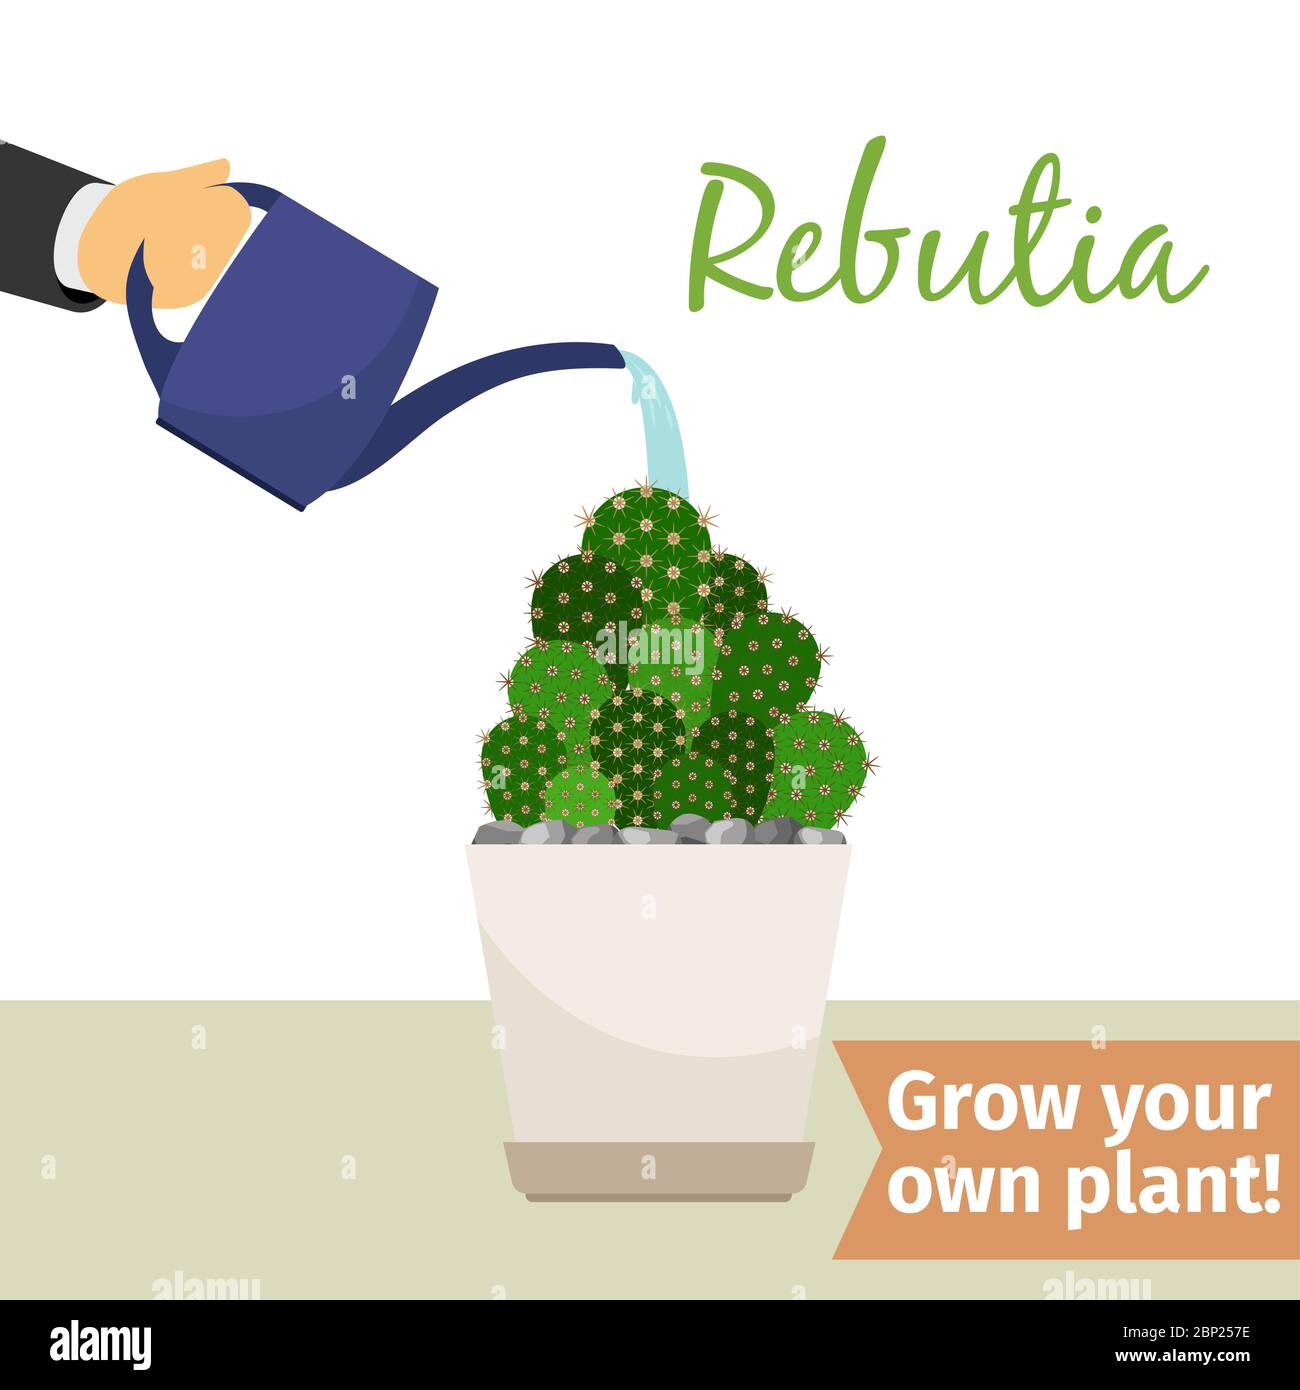 Hand with watering can pours rebutia vector illustration for flower shop Stock Vector